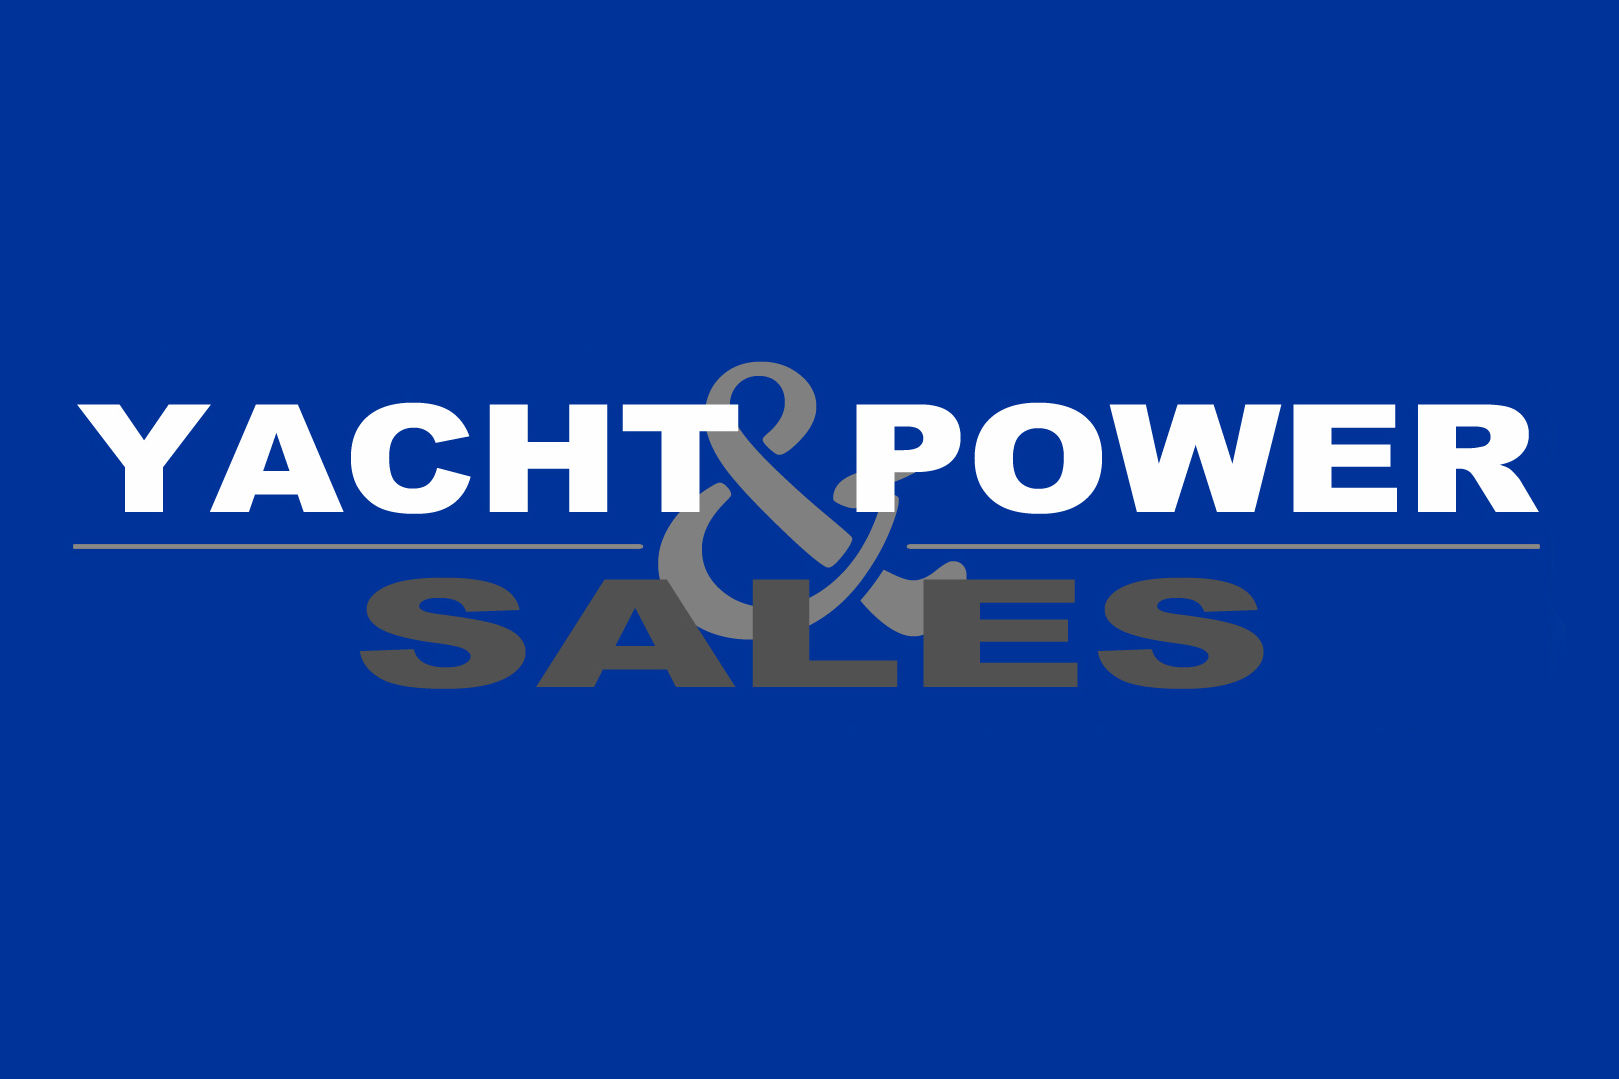 Yacht and Power Sales 4x6